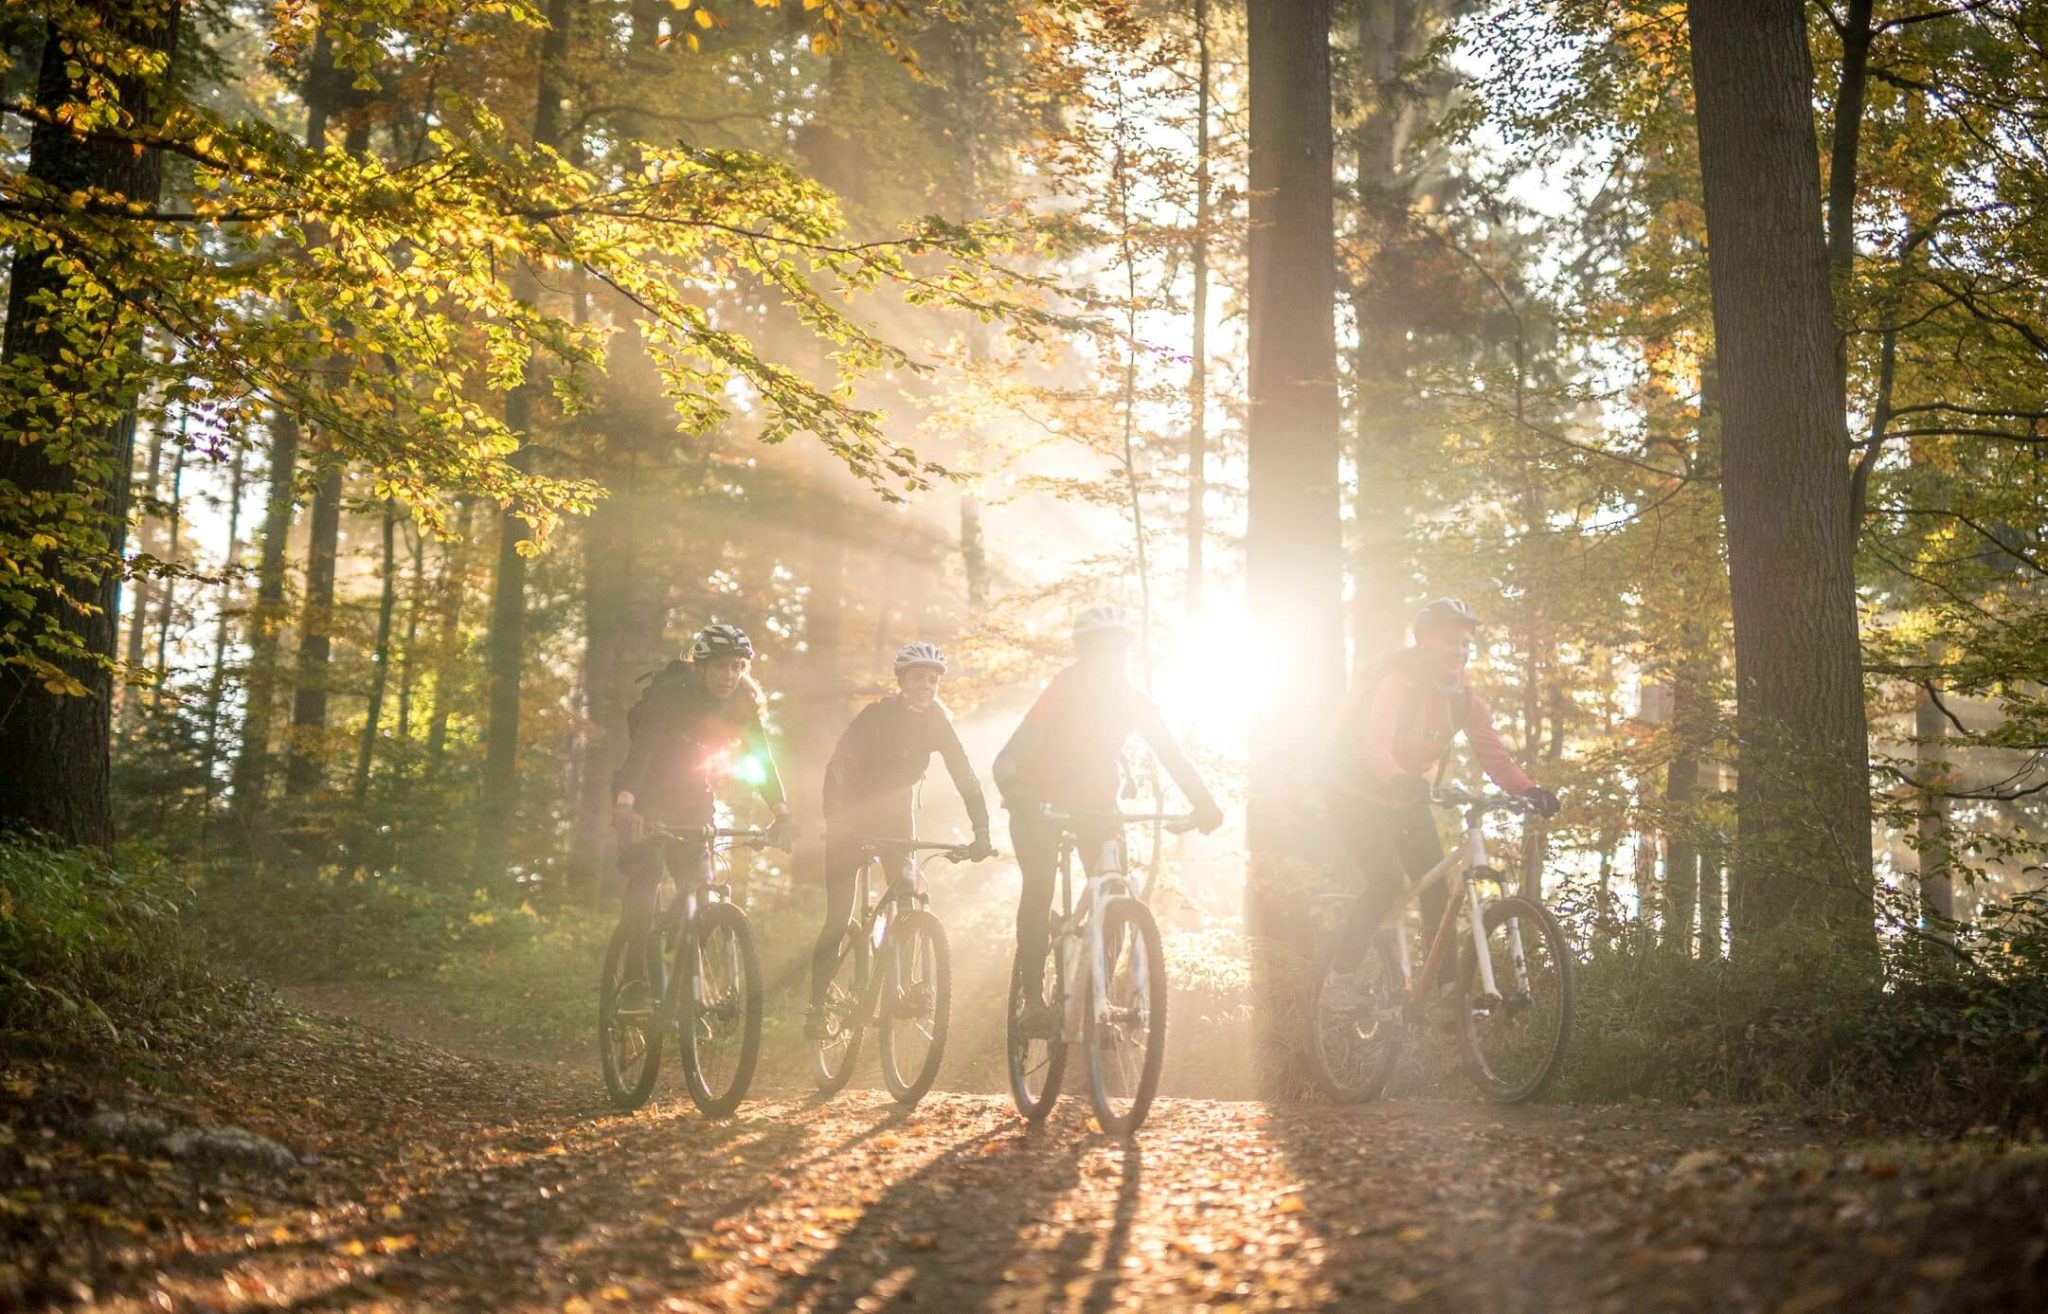 A group of people on a bike trip